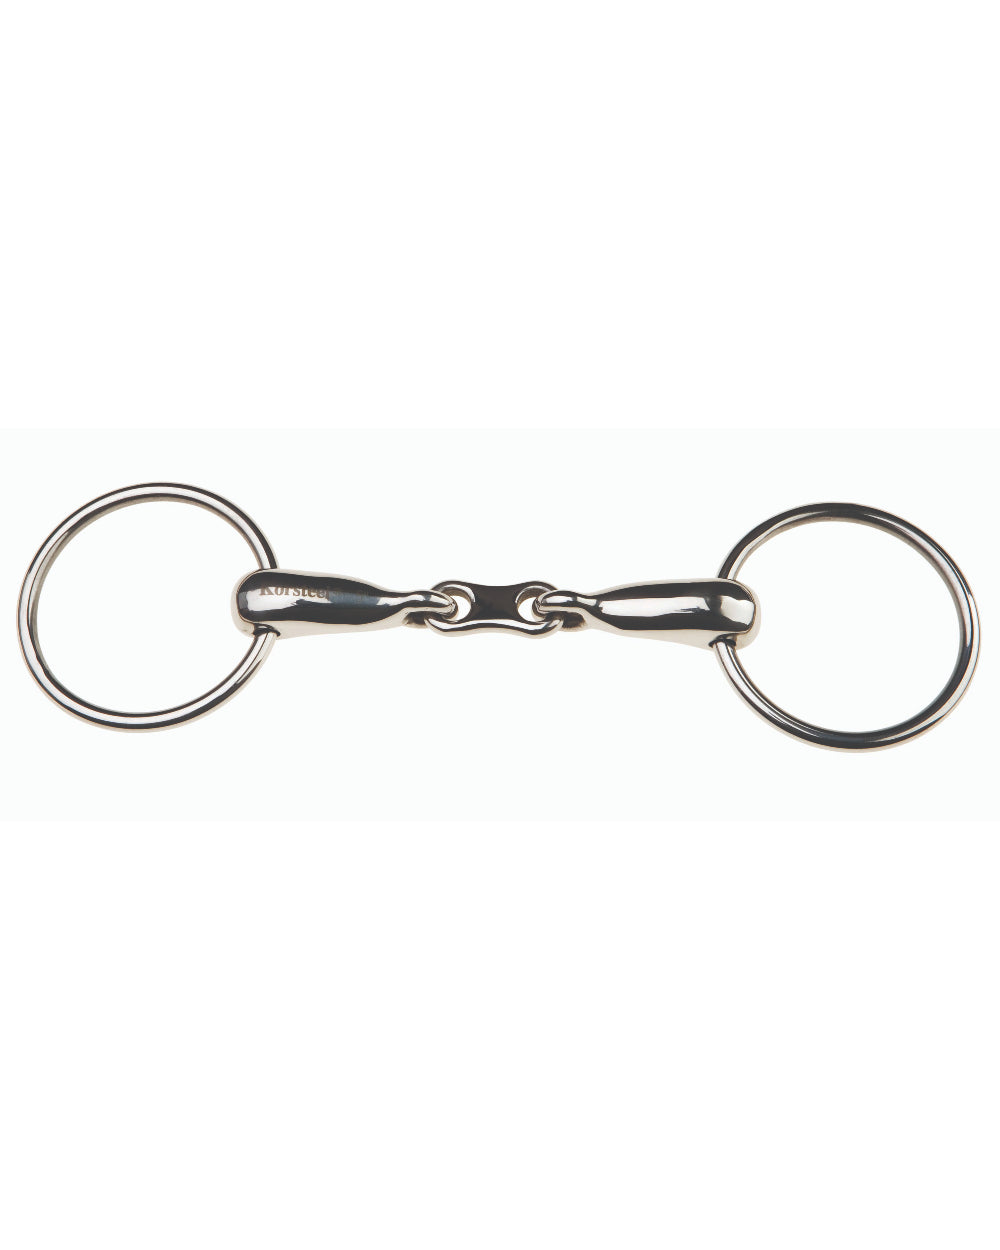 Korsteel Stainless Steel Hollow Mouth French Link Loose Ring Snaffle Bit on white background